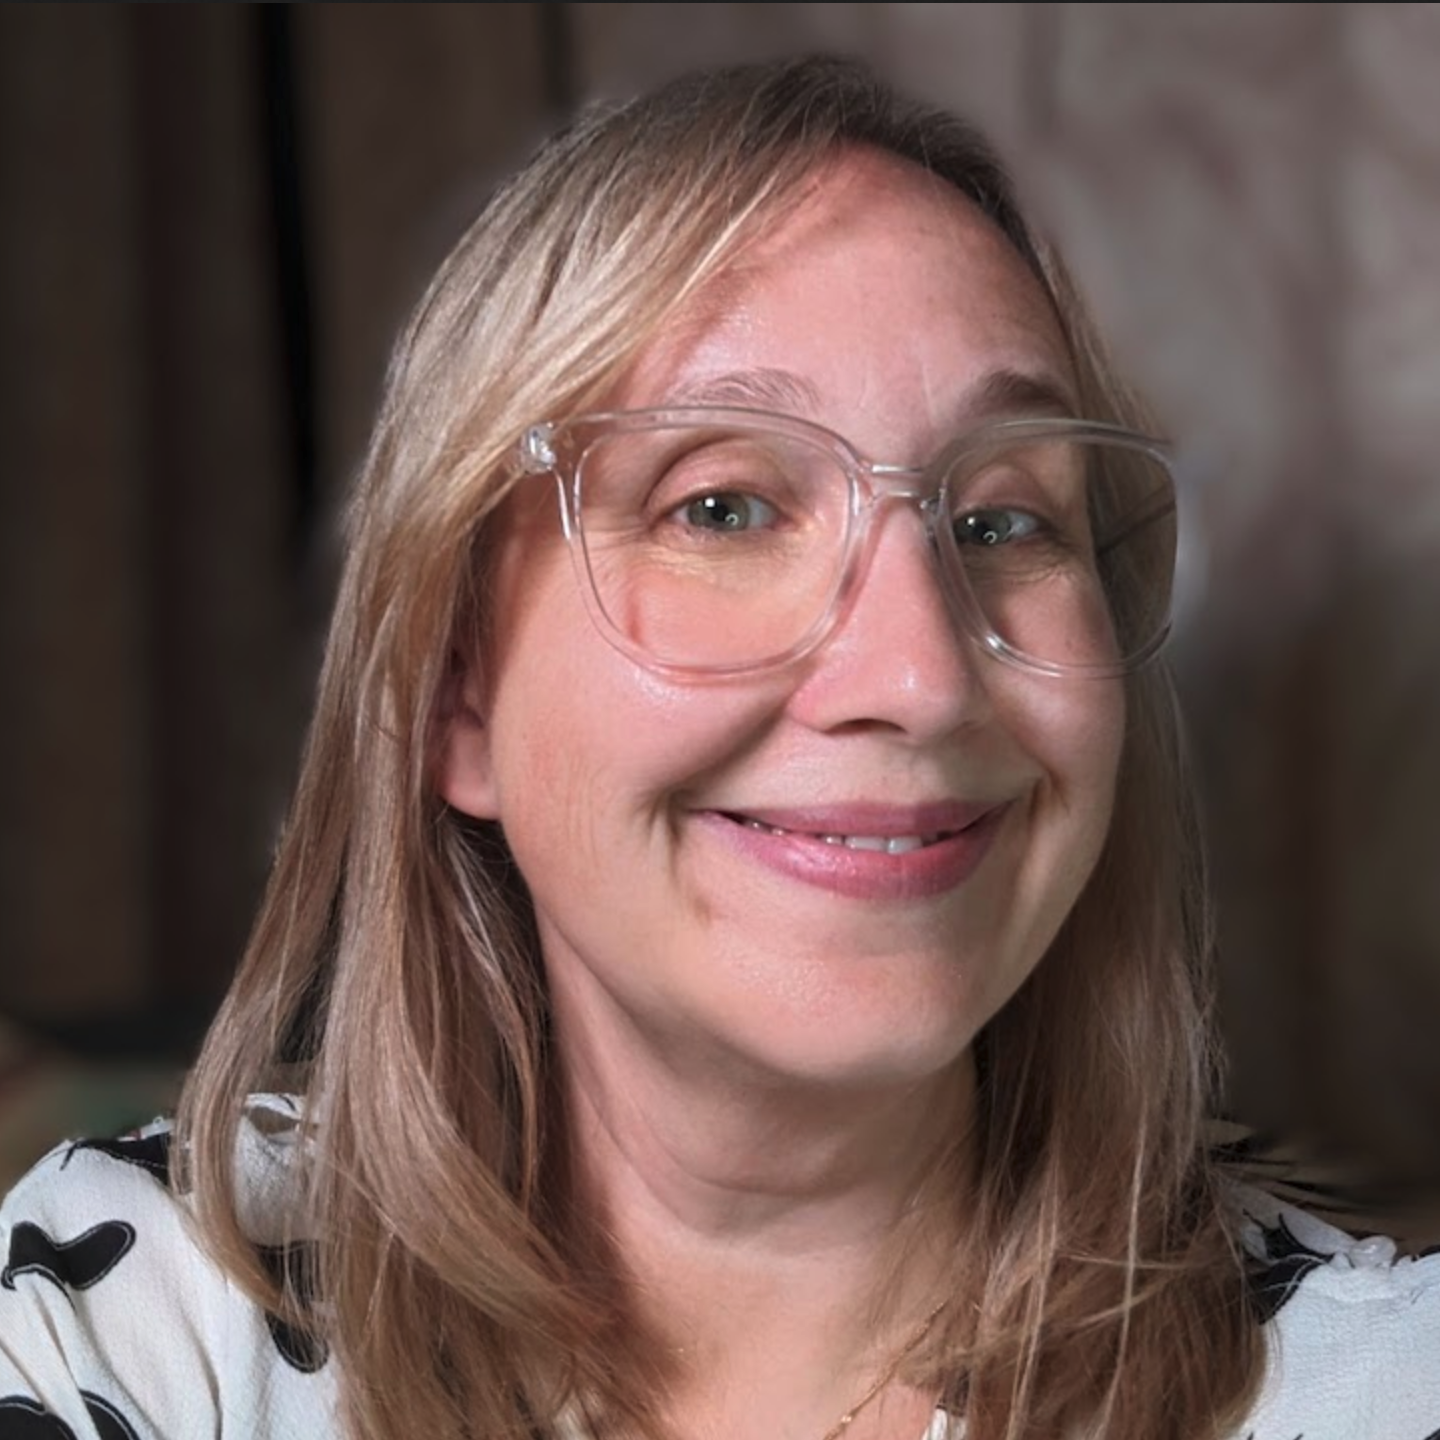 Rachel Thompson has light straight shoulder-length hair and wears a black and white shirt with stylized hearts on them, and clear big-framed glasses as she slightly smiles in this photo.